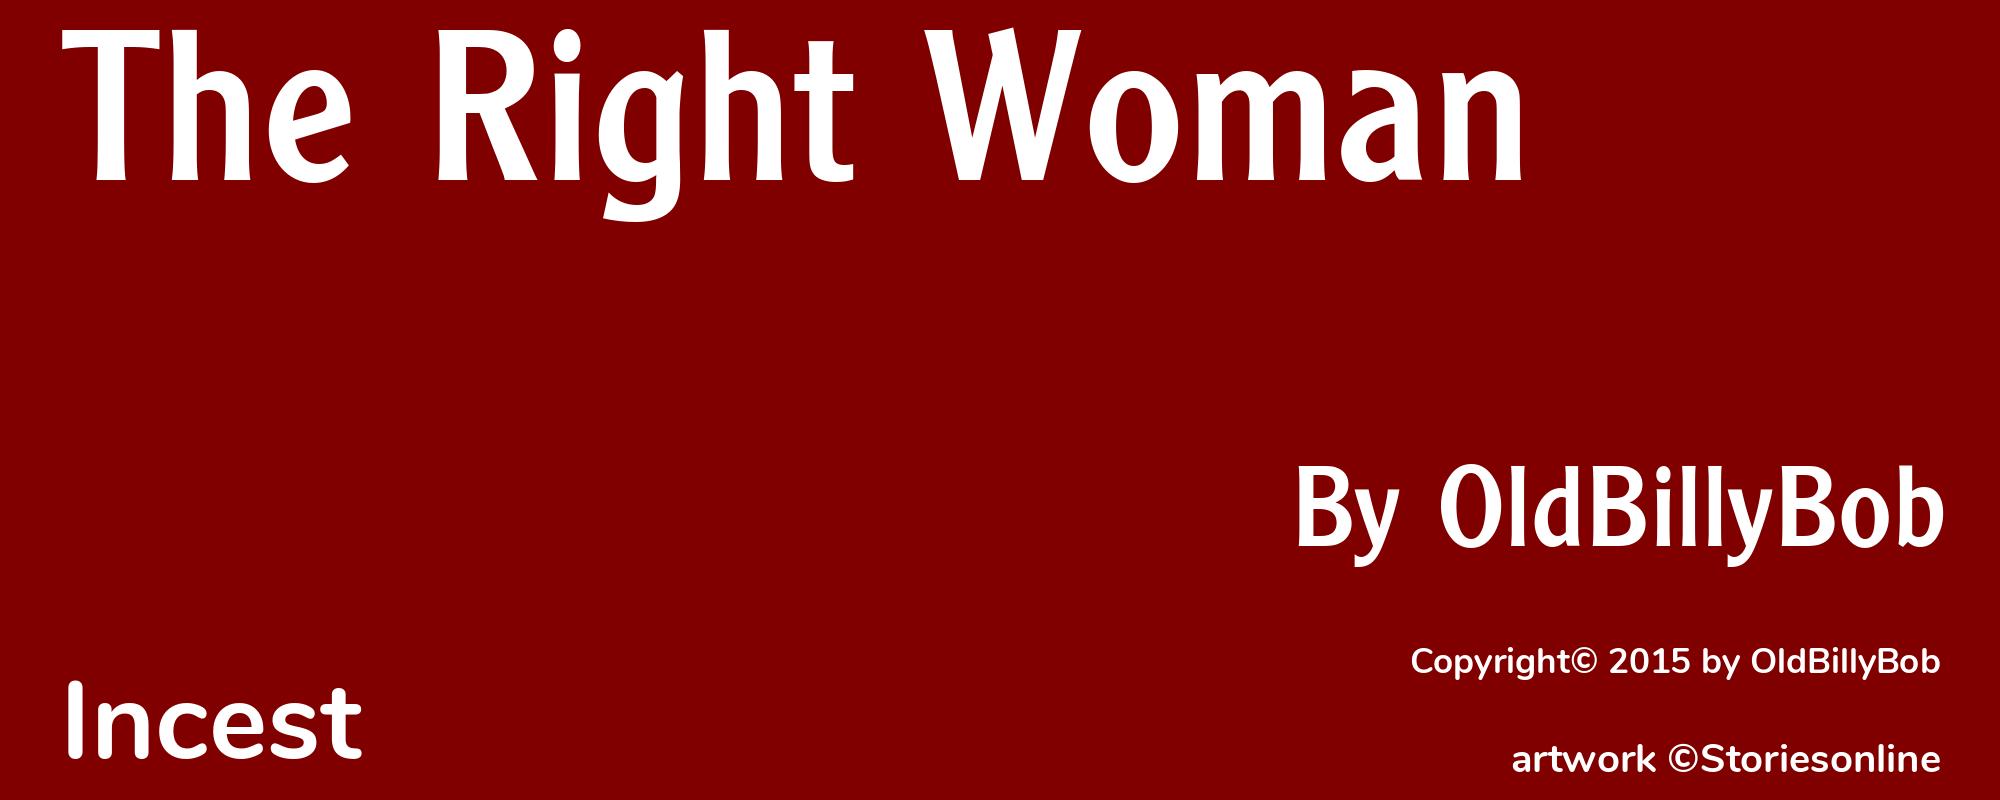 The Right Woman - Cover